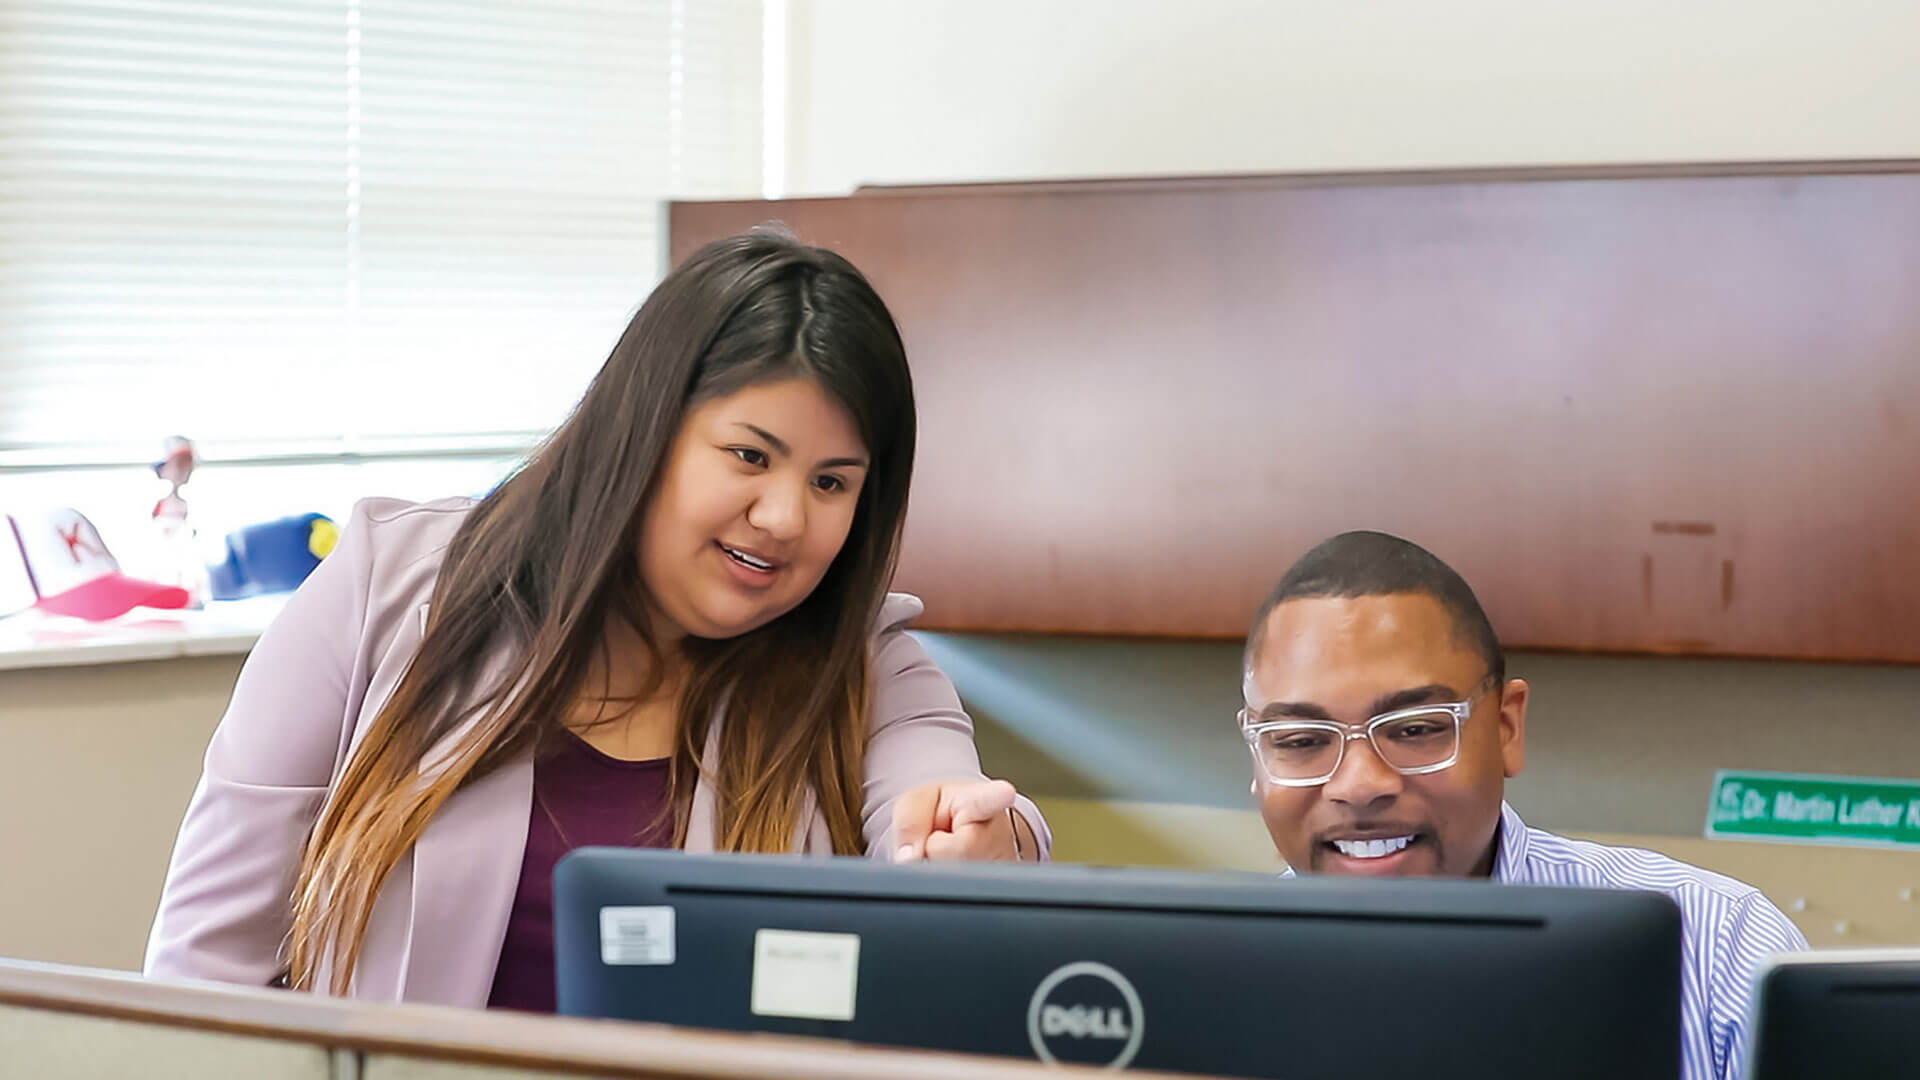 a mentor stands beside a student sitting at a computer and points out something on the monitor